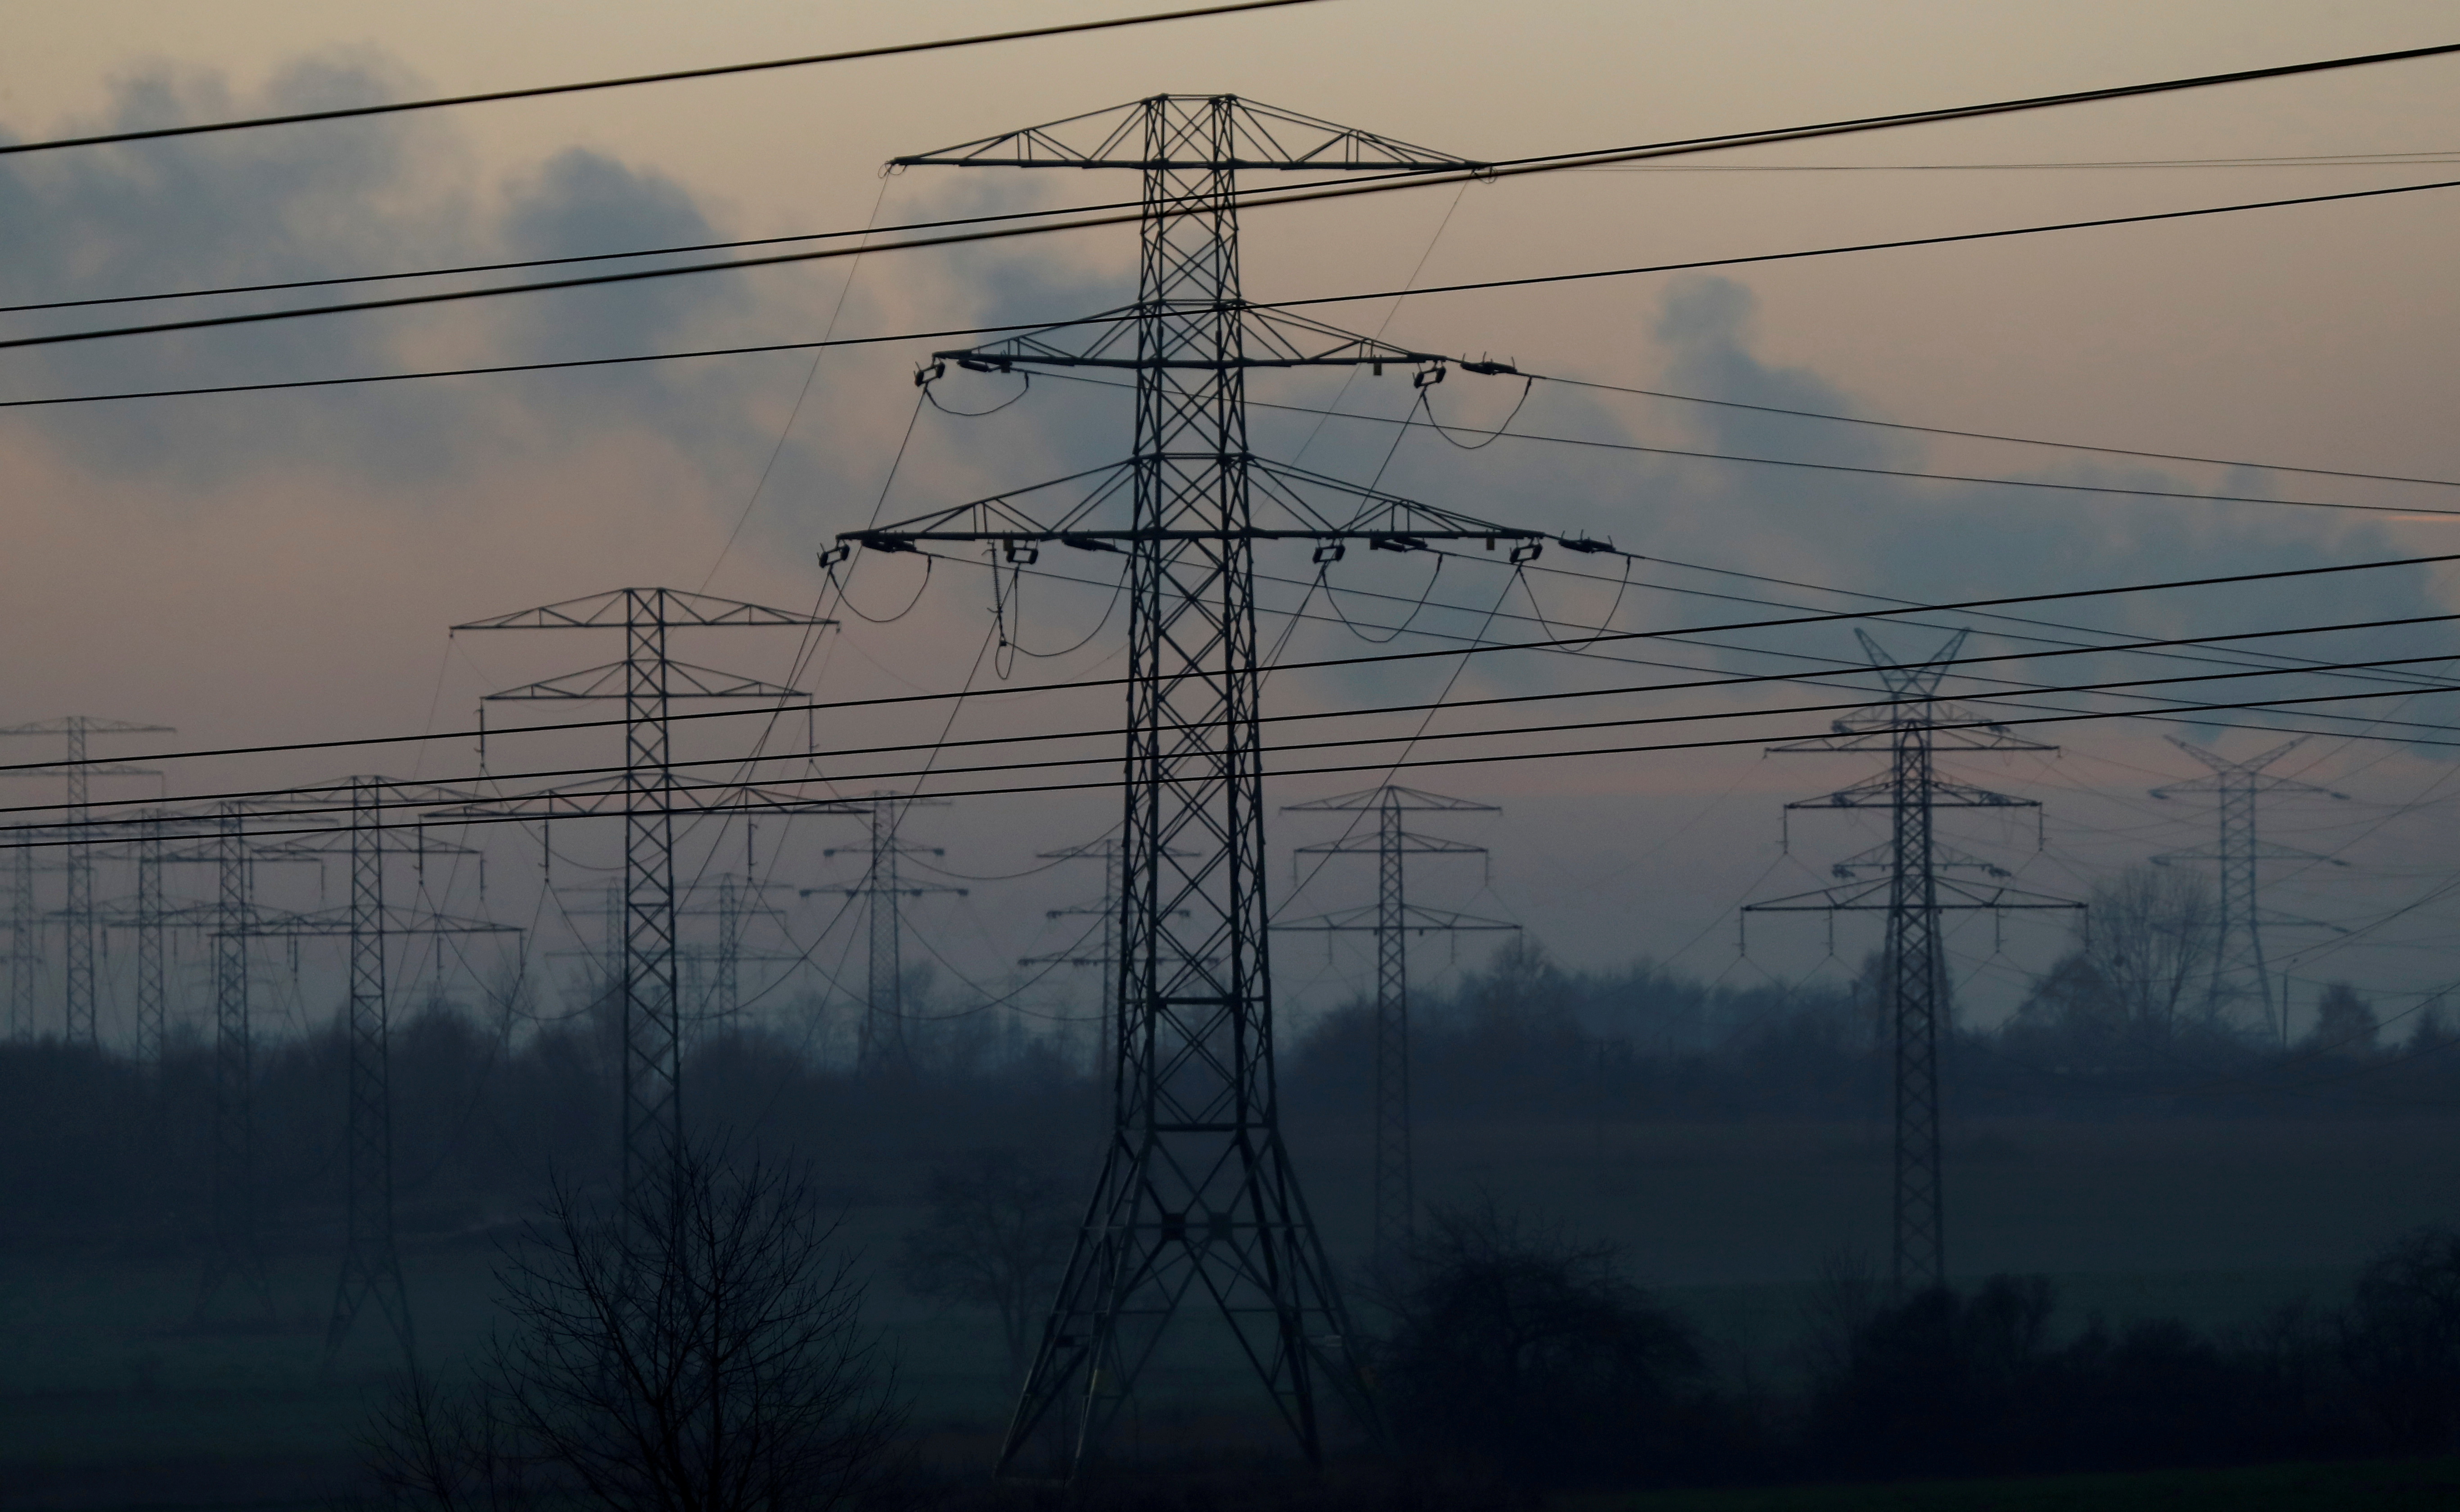 Smog is seen near transmission towers in Bedzin